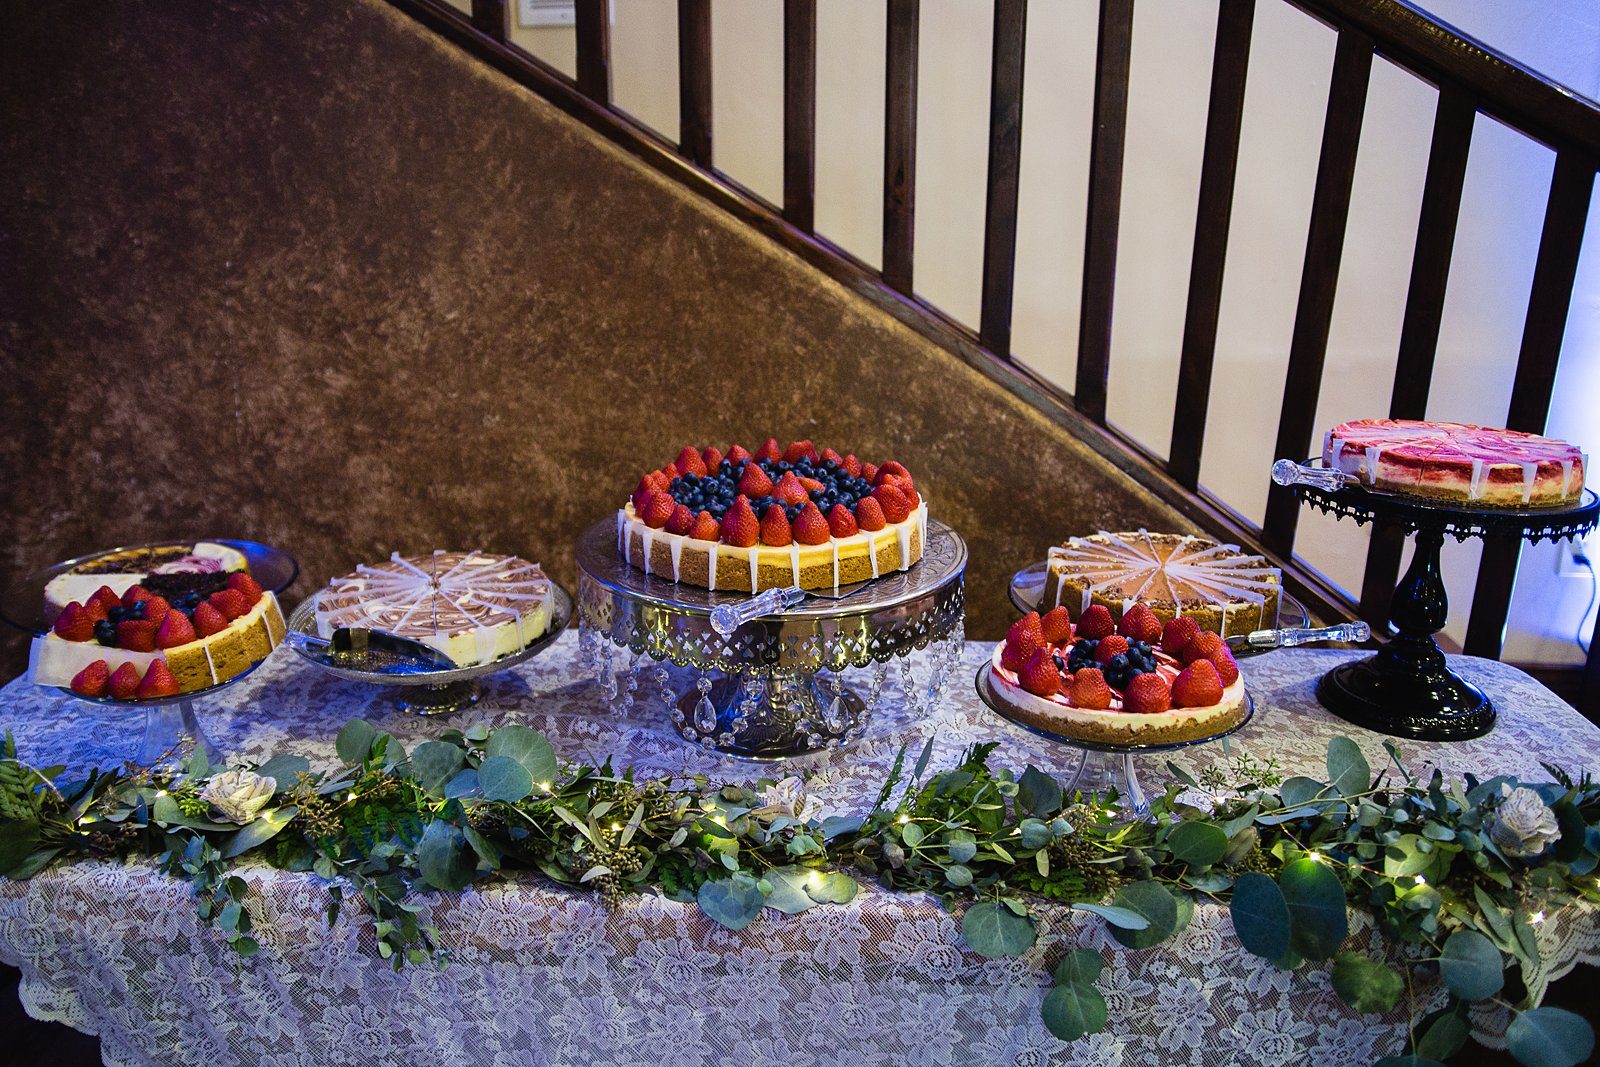 Assorted cheesecake table as a wedding cake alternative by PMA Photography.